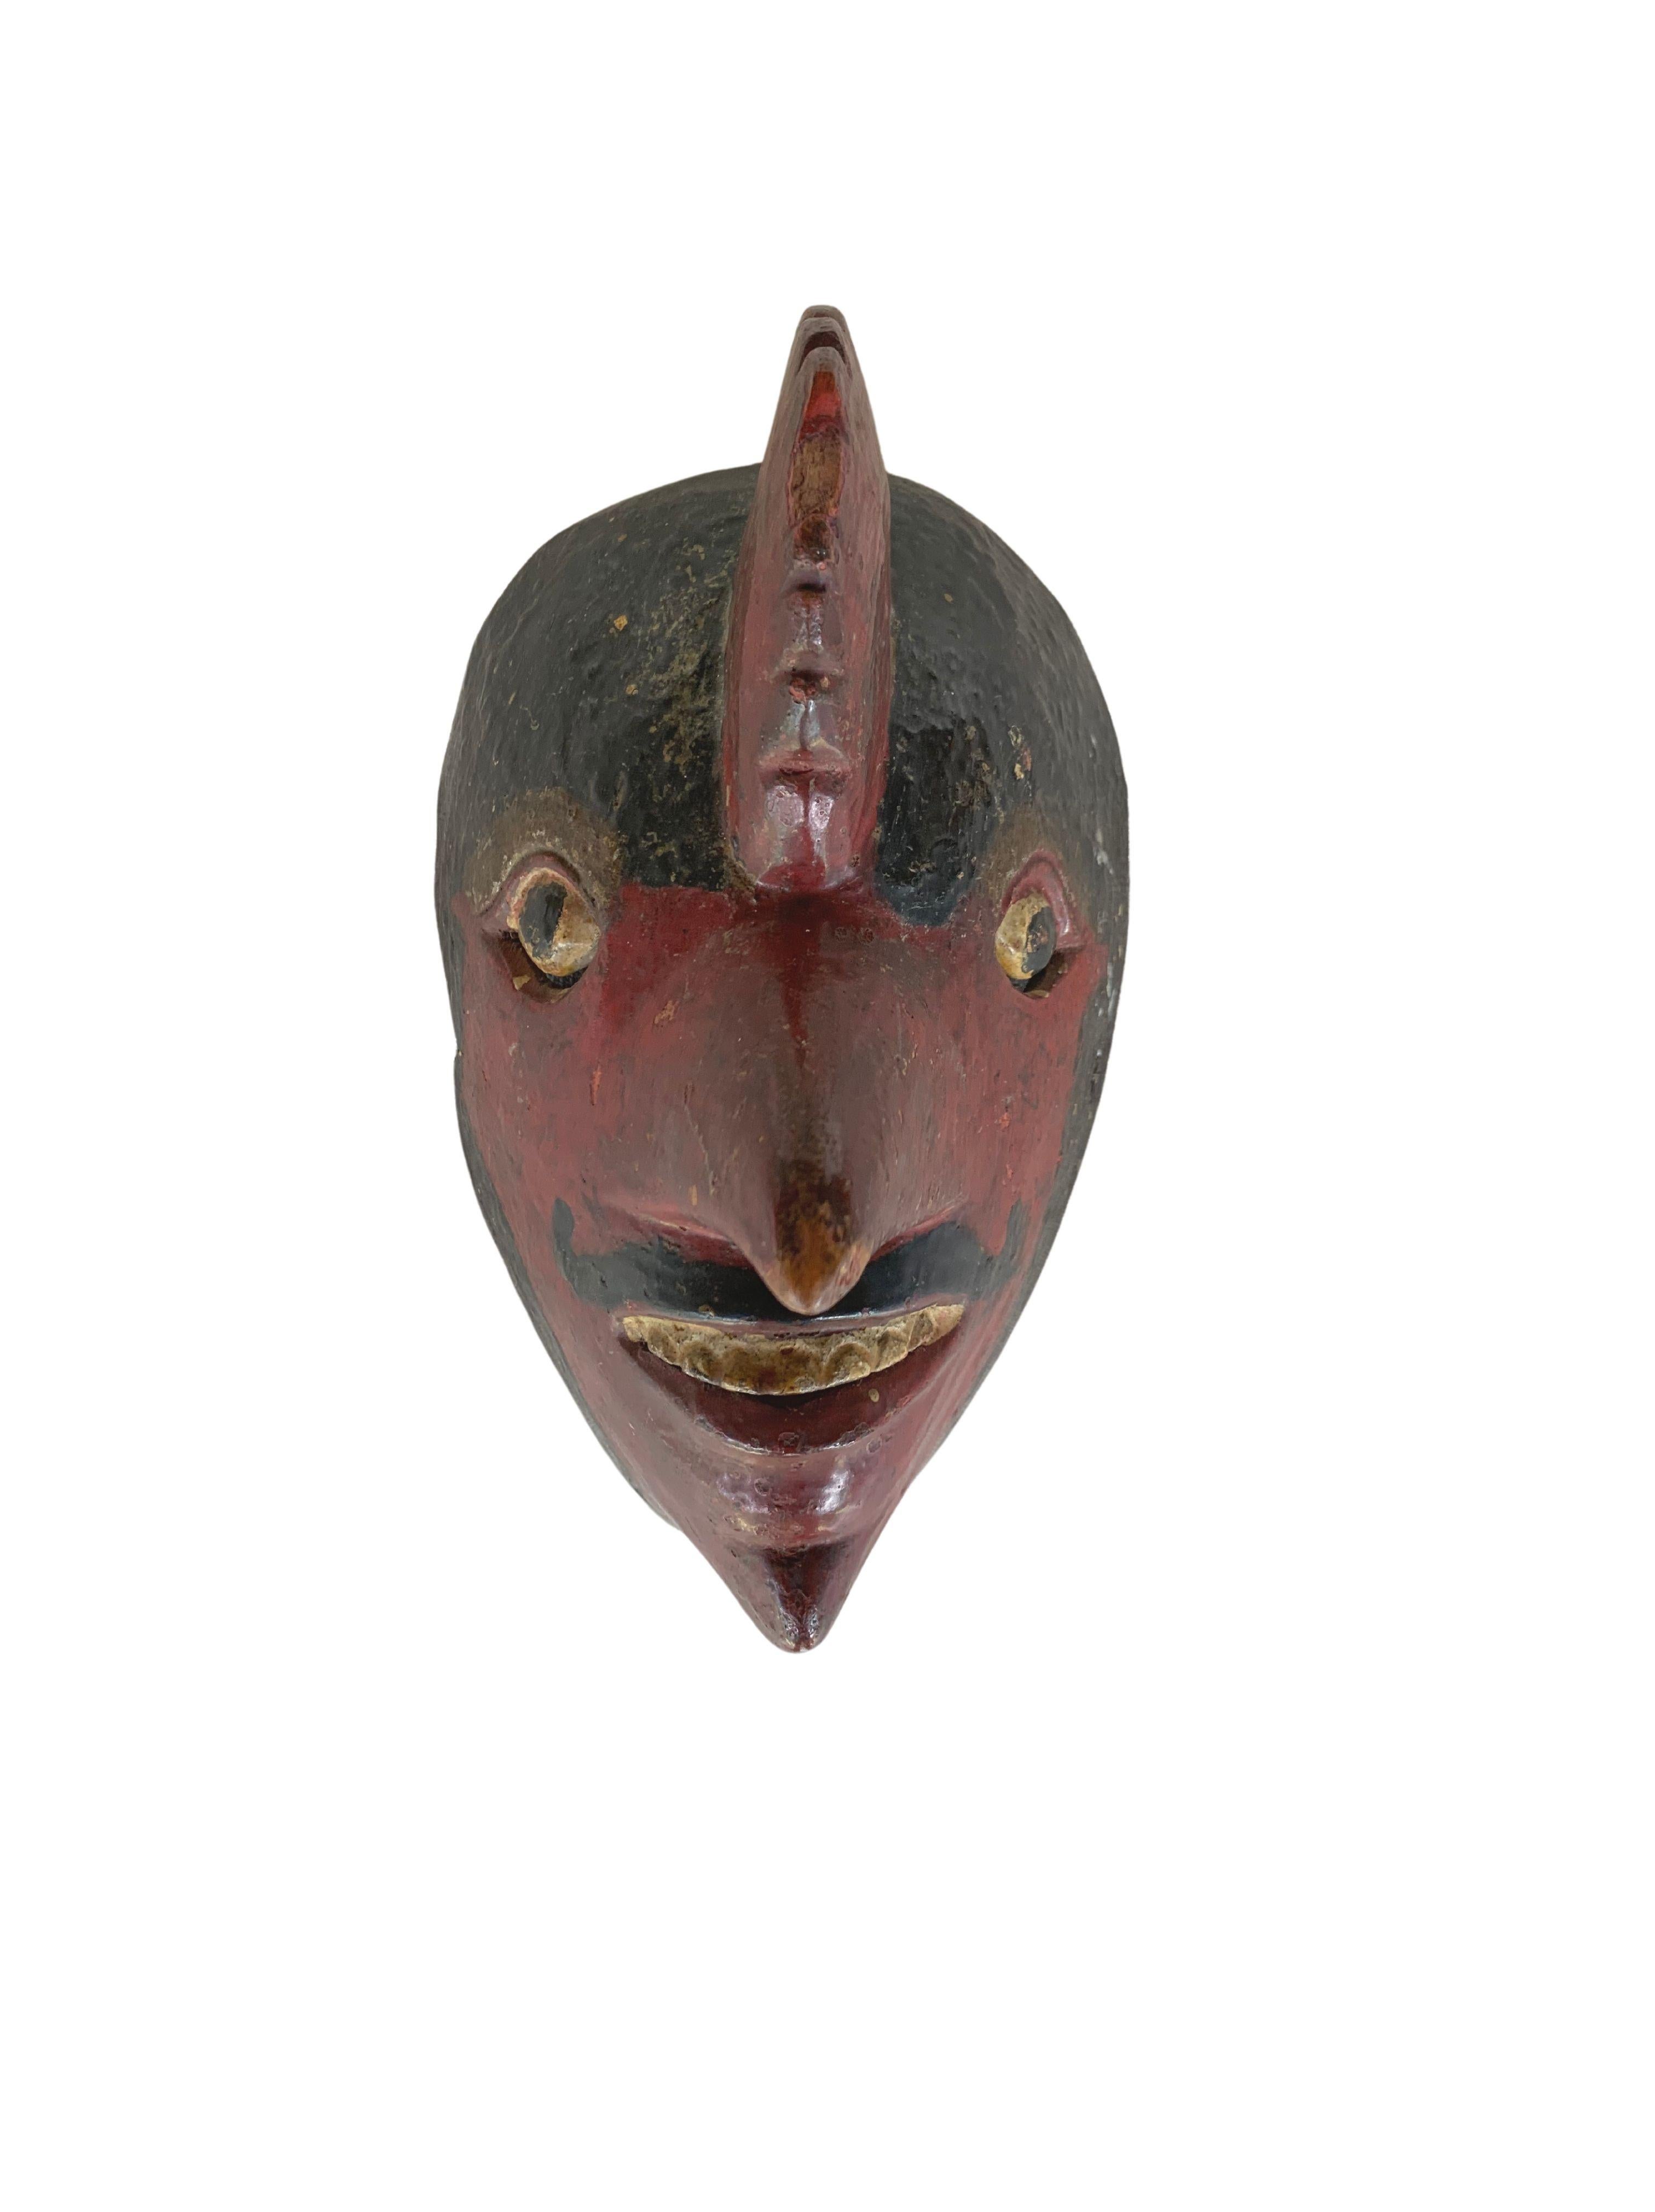 This early 20th century ‘Wayang topeng’ mask was used in Javanese masked dance performances. This mask features a dark red polychrome and resembles a bird-man with an extended and exaggerated nose. It is visibly old with fading of the original